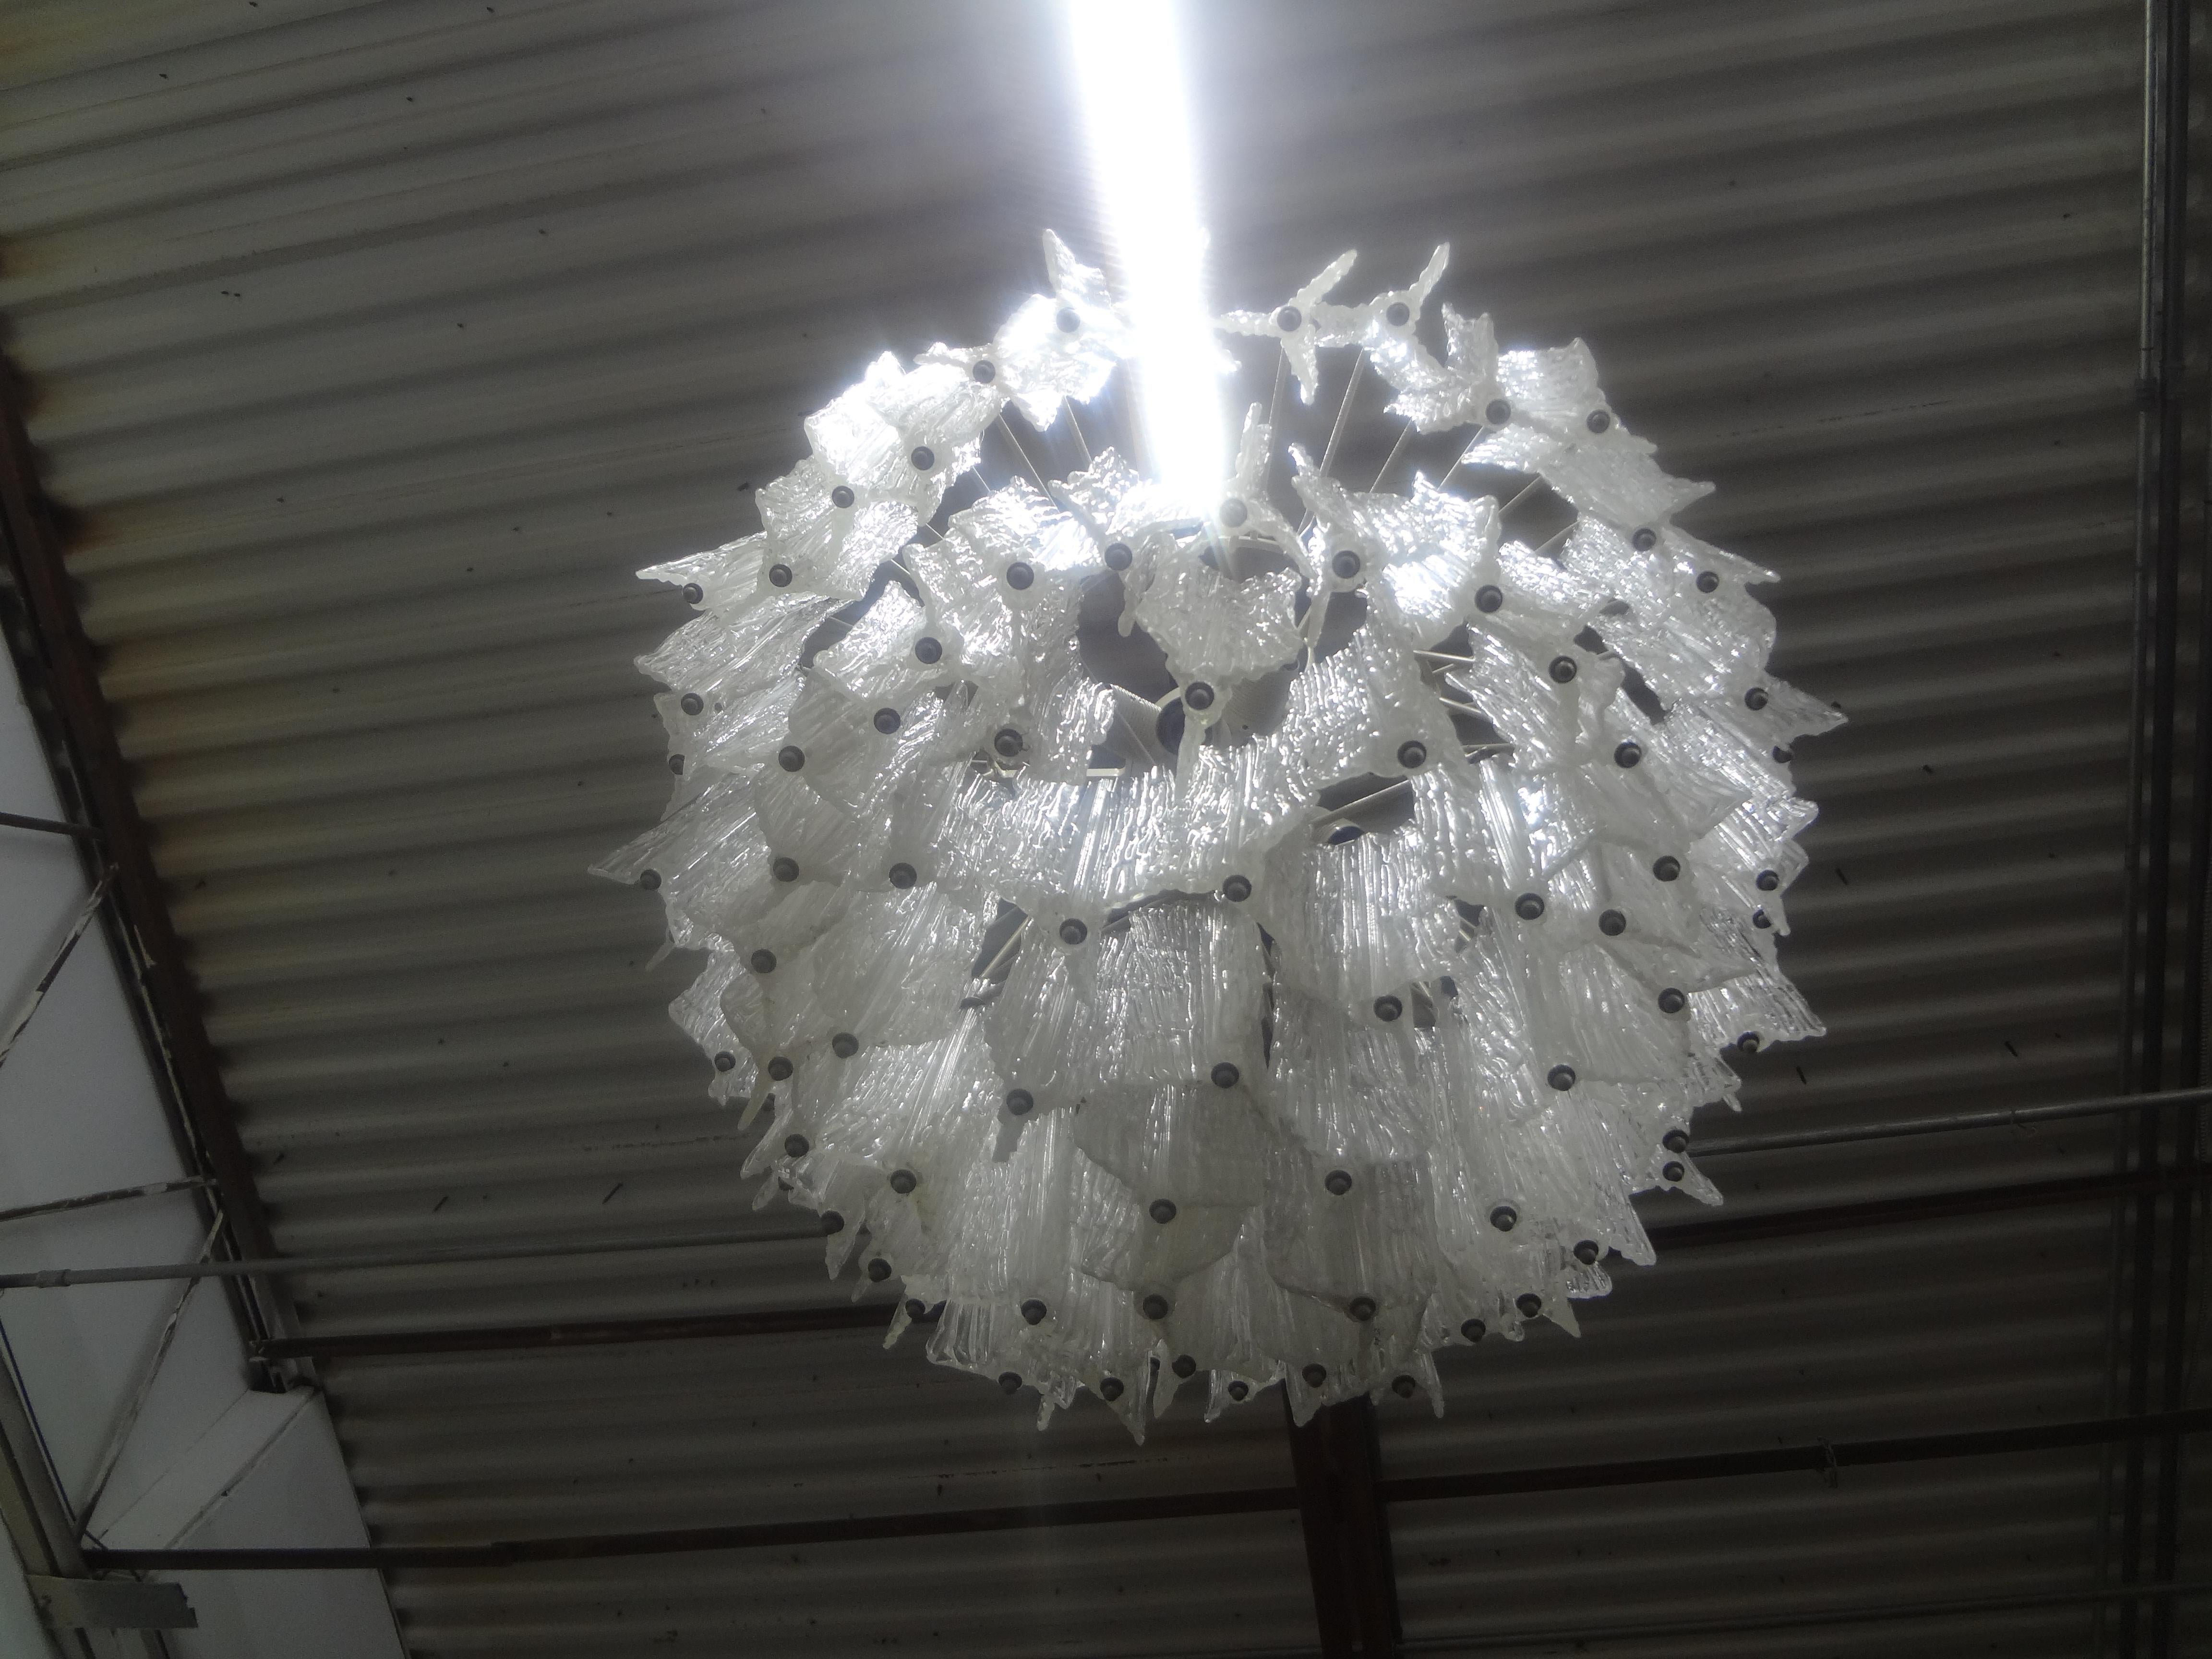 Pair of Large Mid-Century Modern Italian Murano Chandeliers Attributed to Venini For Sale 3